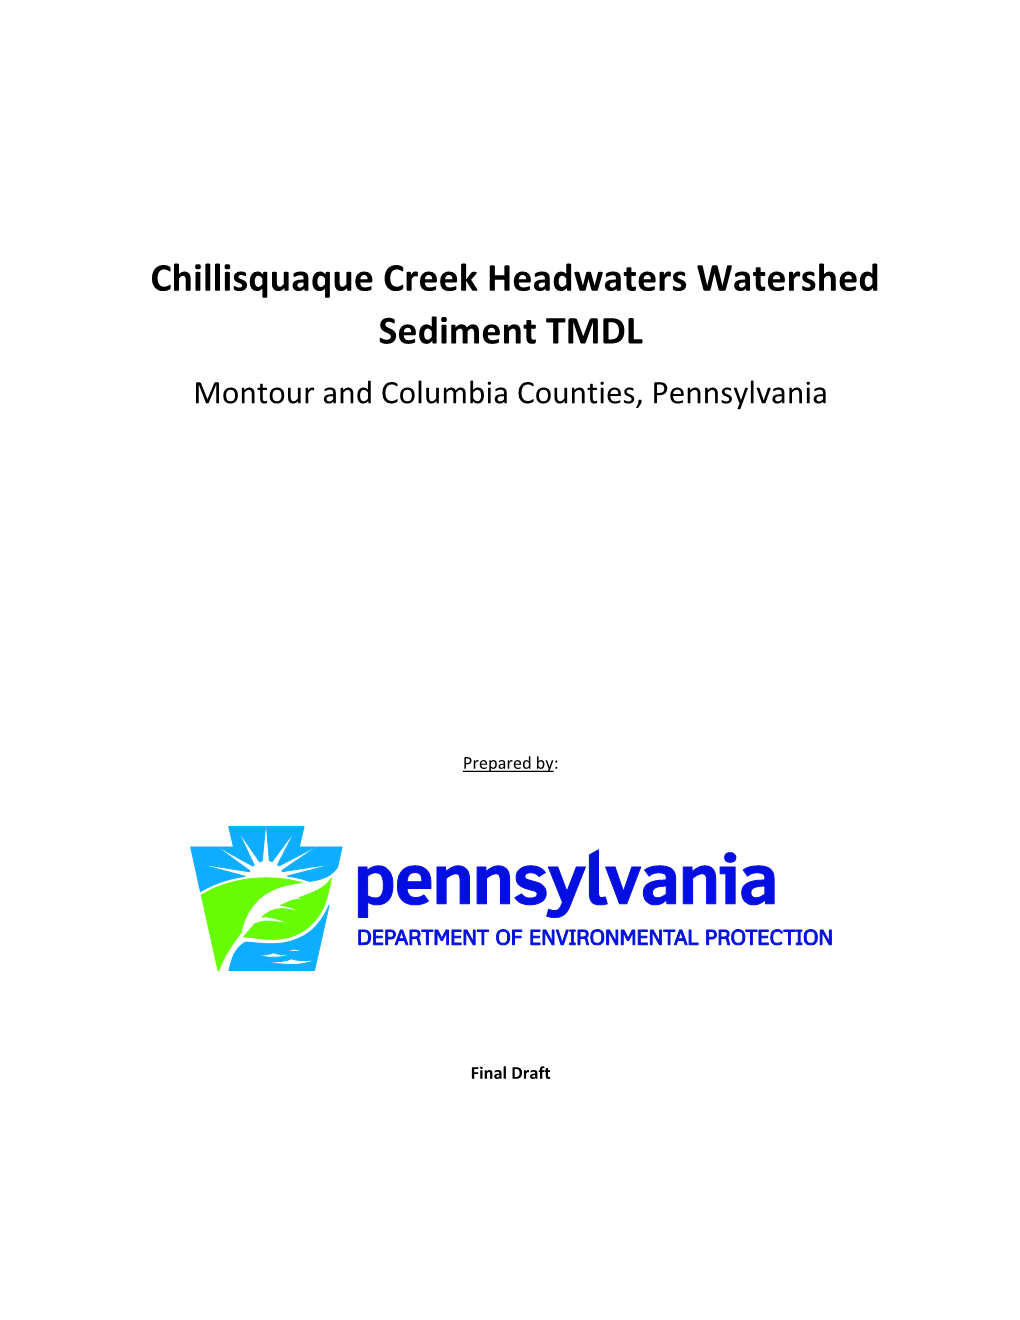 Chillisquaque Creek Headwaters Watershed Sediment TMDL Montour and Columbia Counties, Pennsylvania